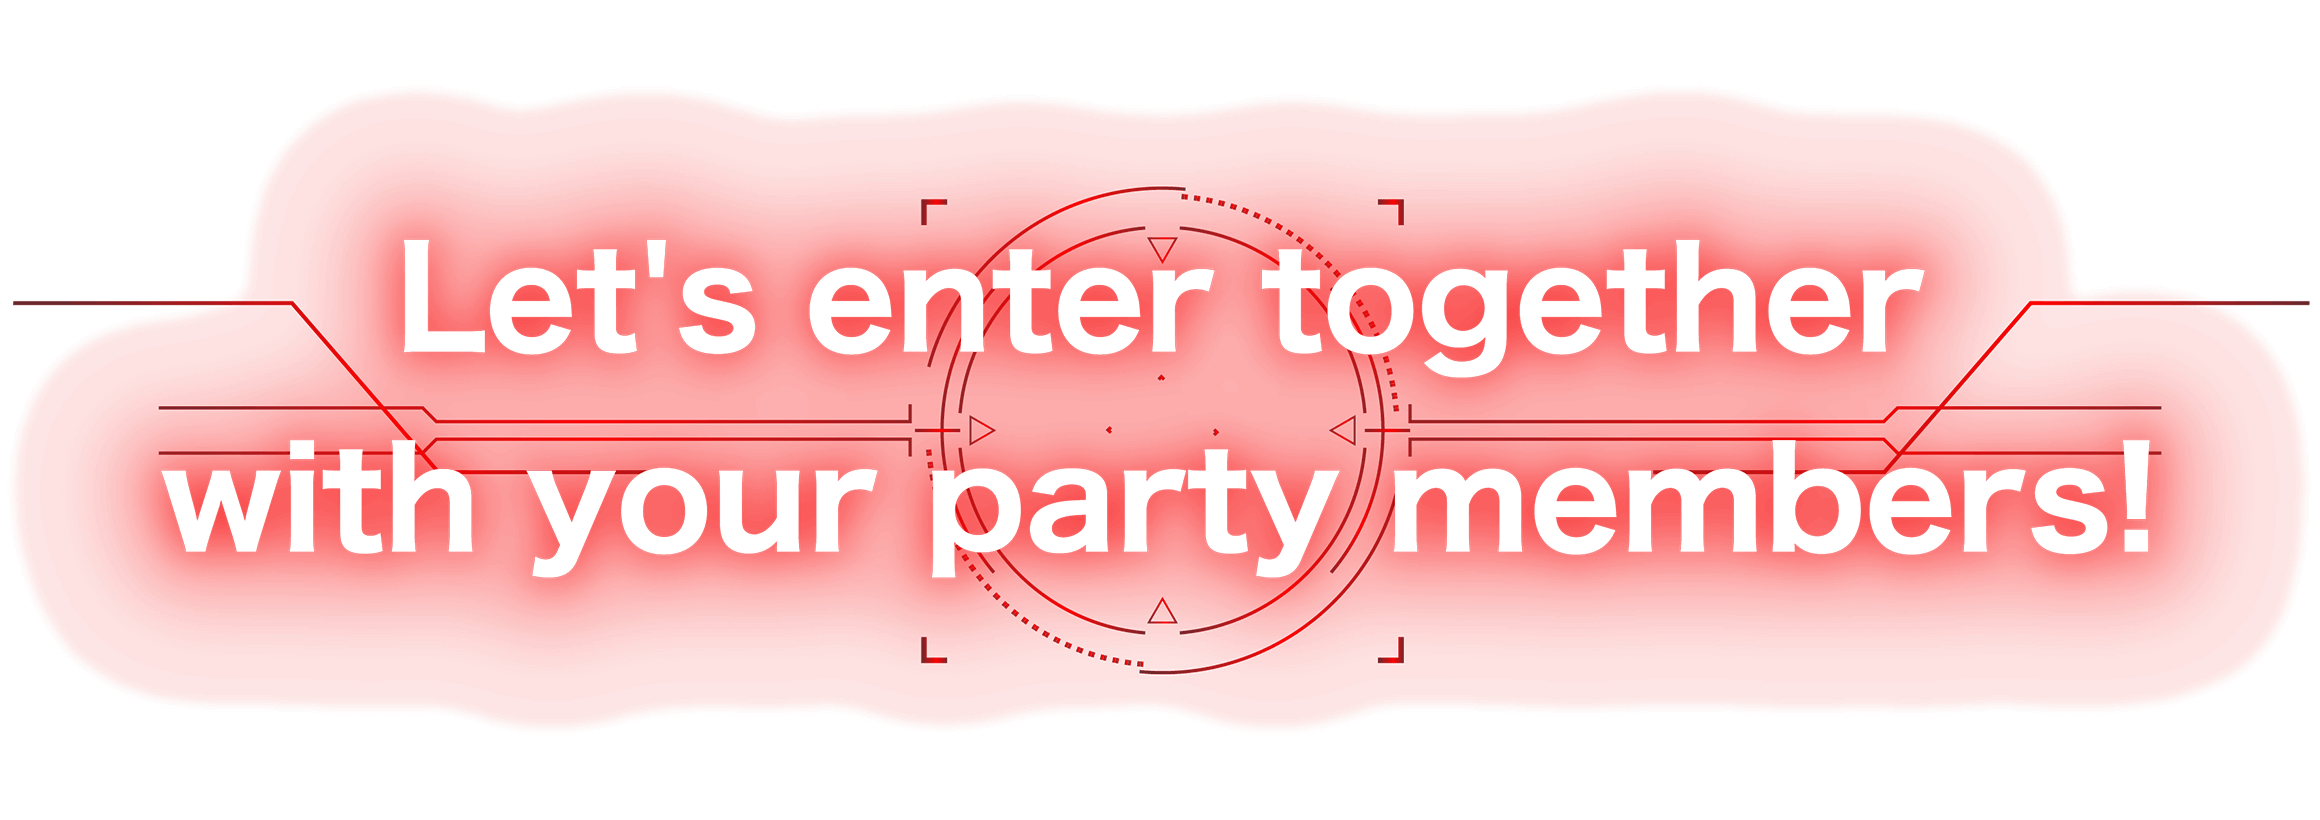 Let's enter together with your party members!